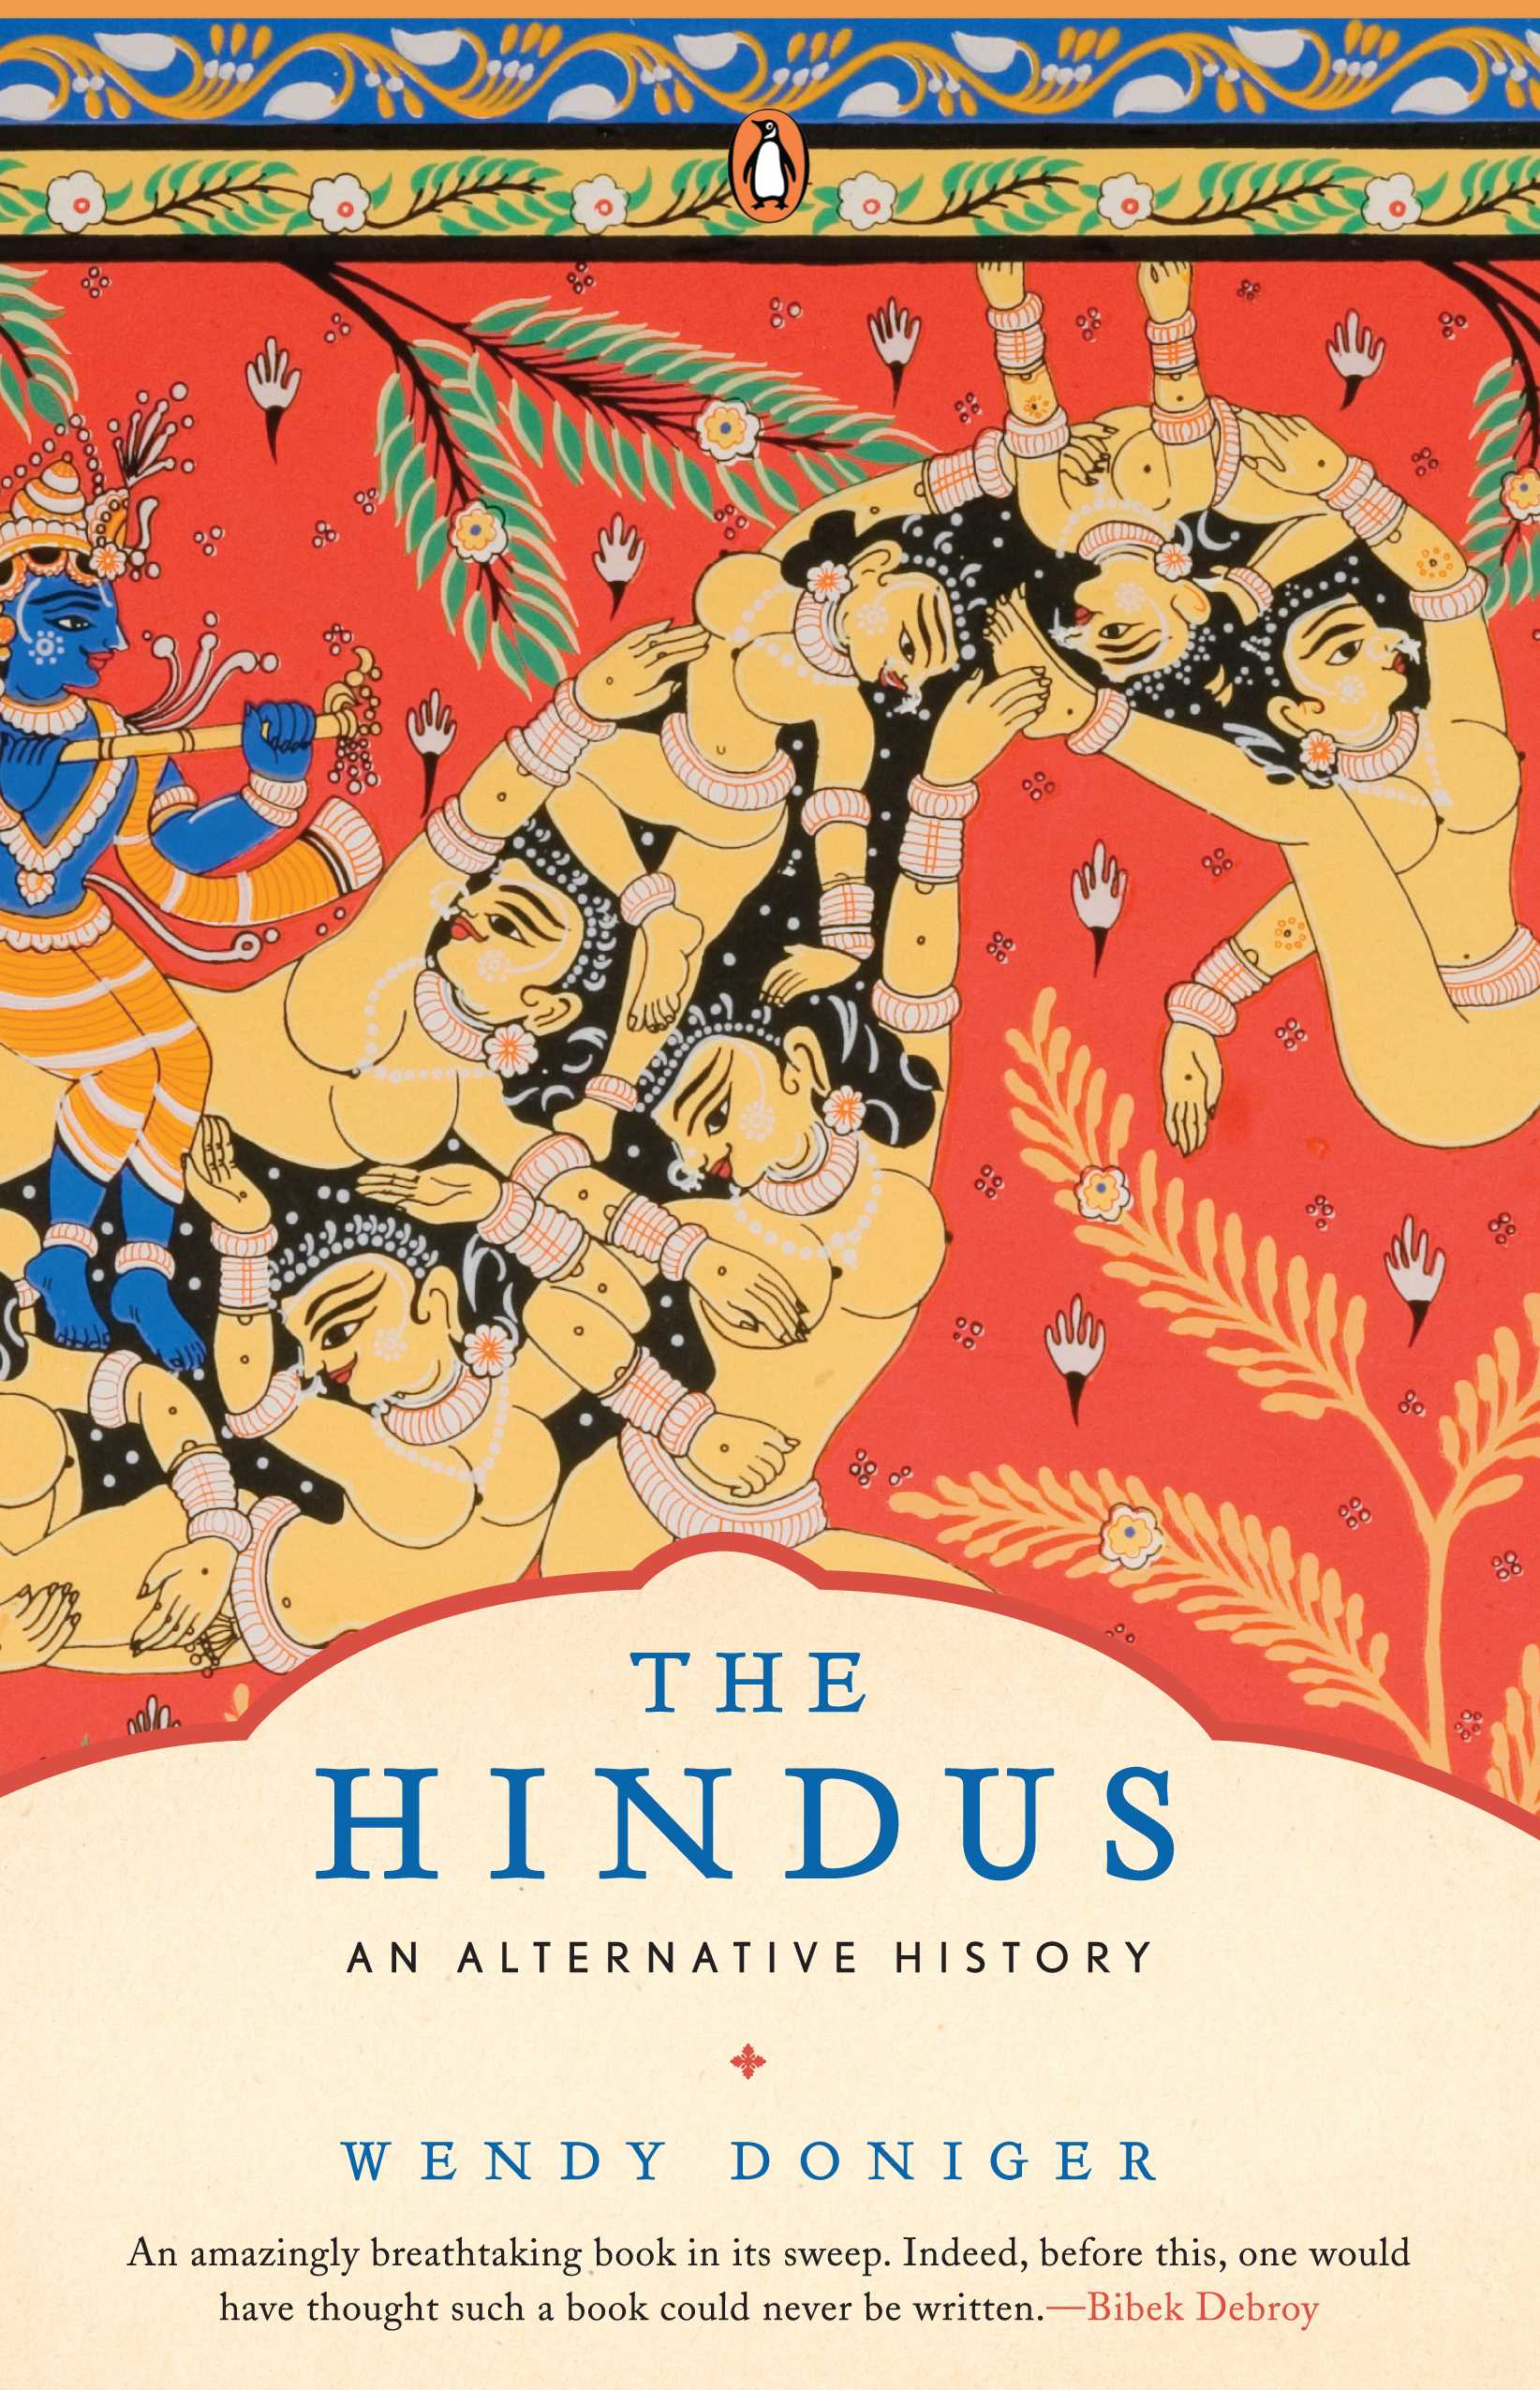 The Hindus